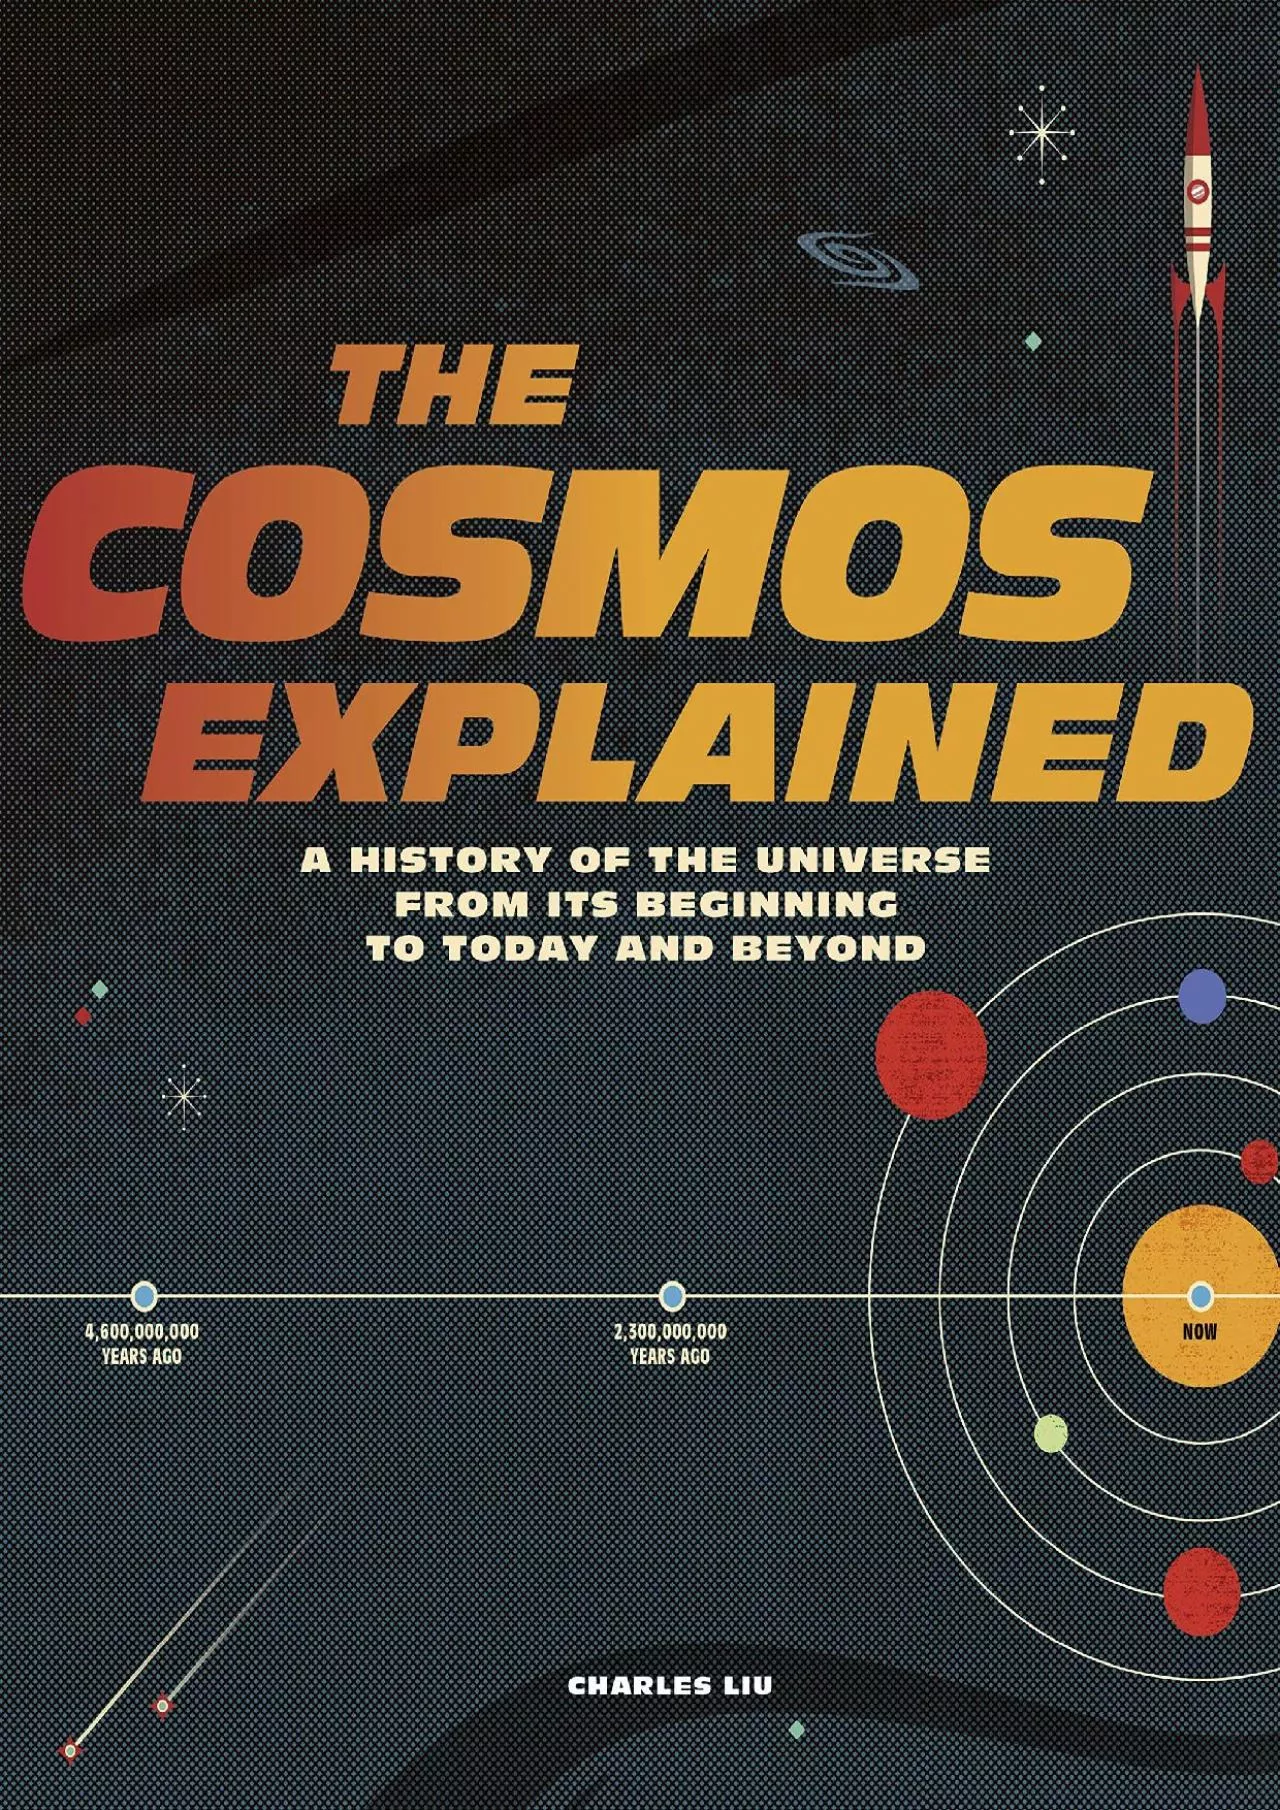 (BOOK)-The Cosmos Explained: A history of the universe from its beginning to today and